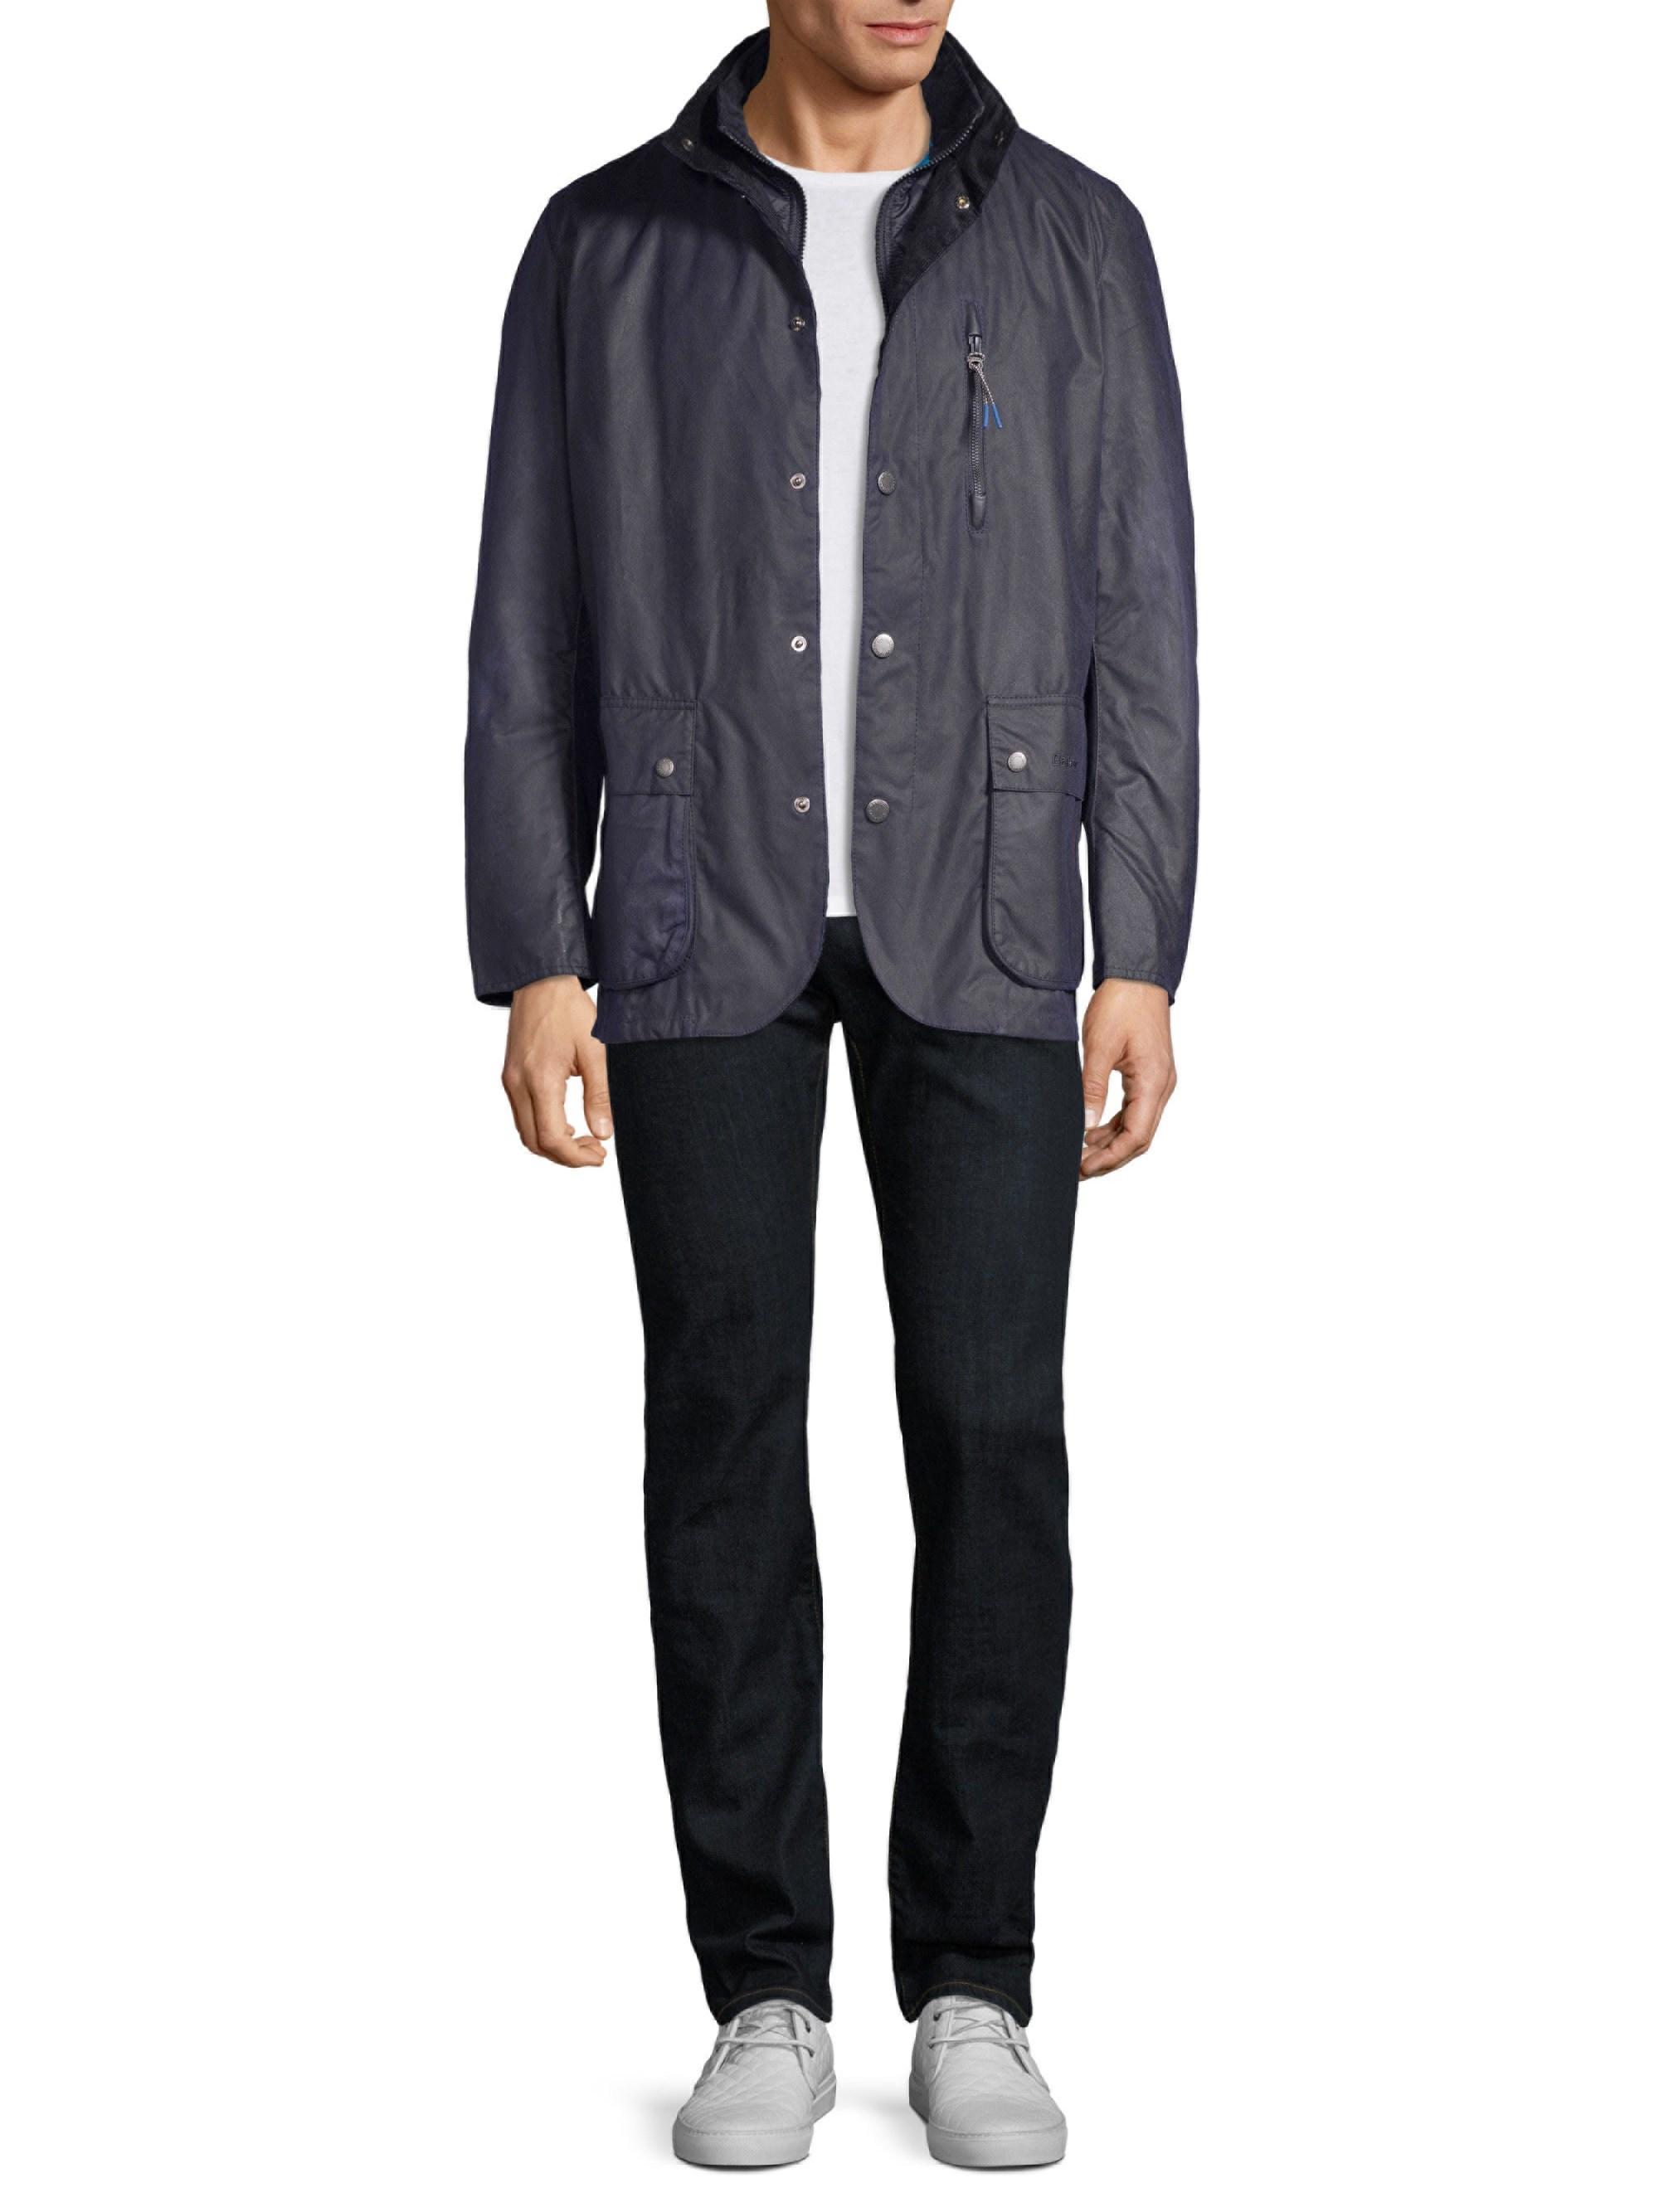 Barbour Surge Waxed Cotton Jacket in Blue for Men - Lyst